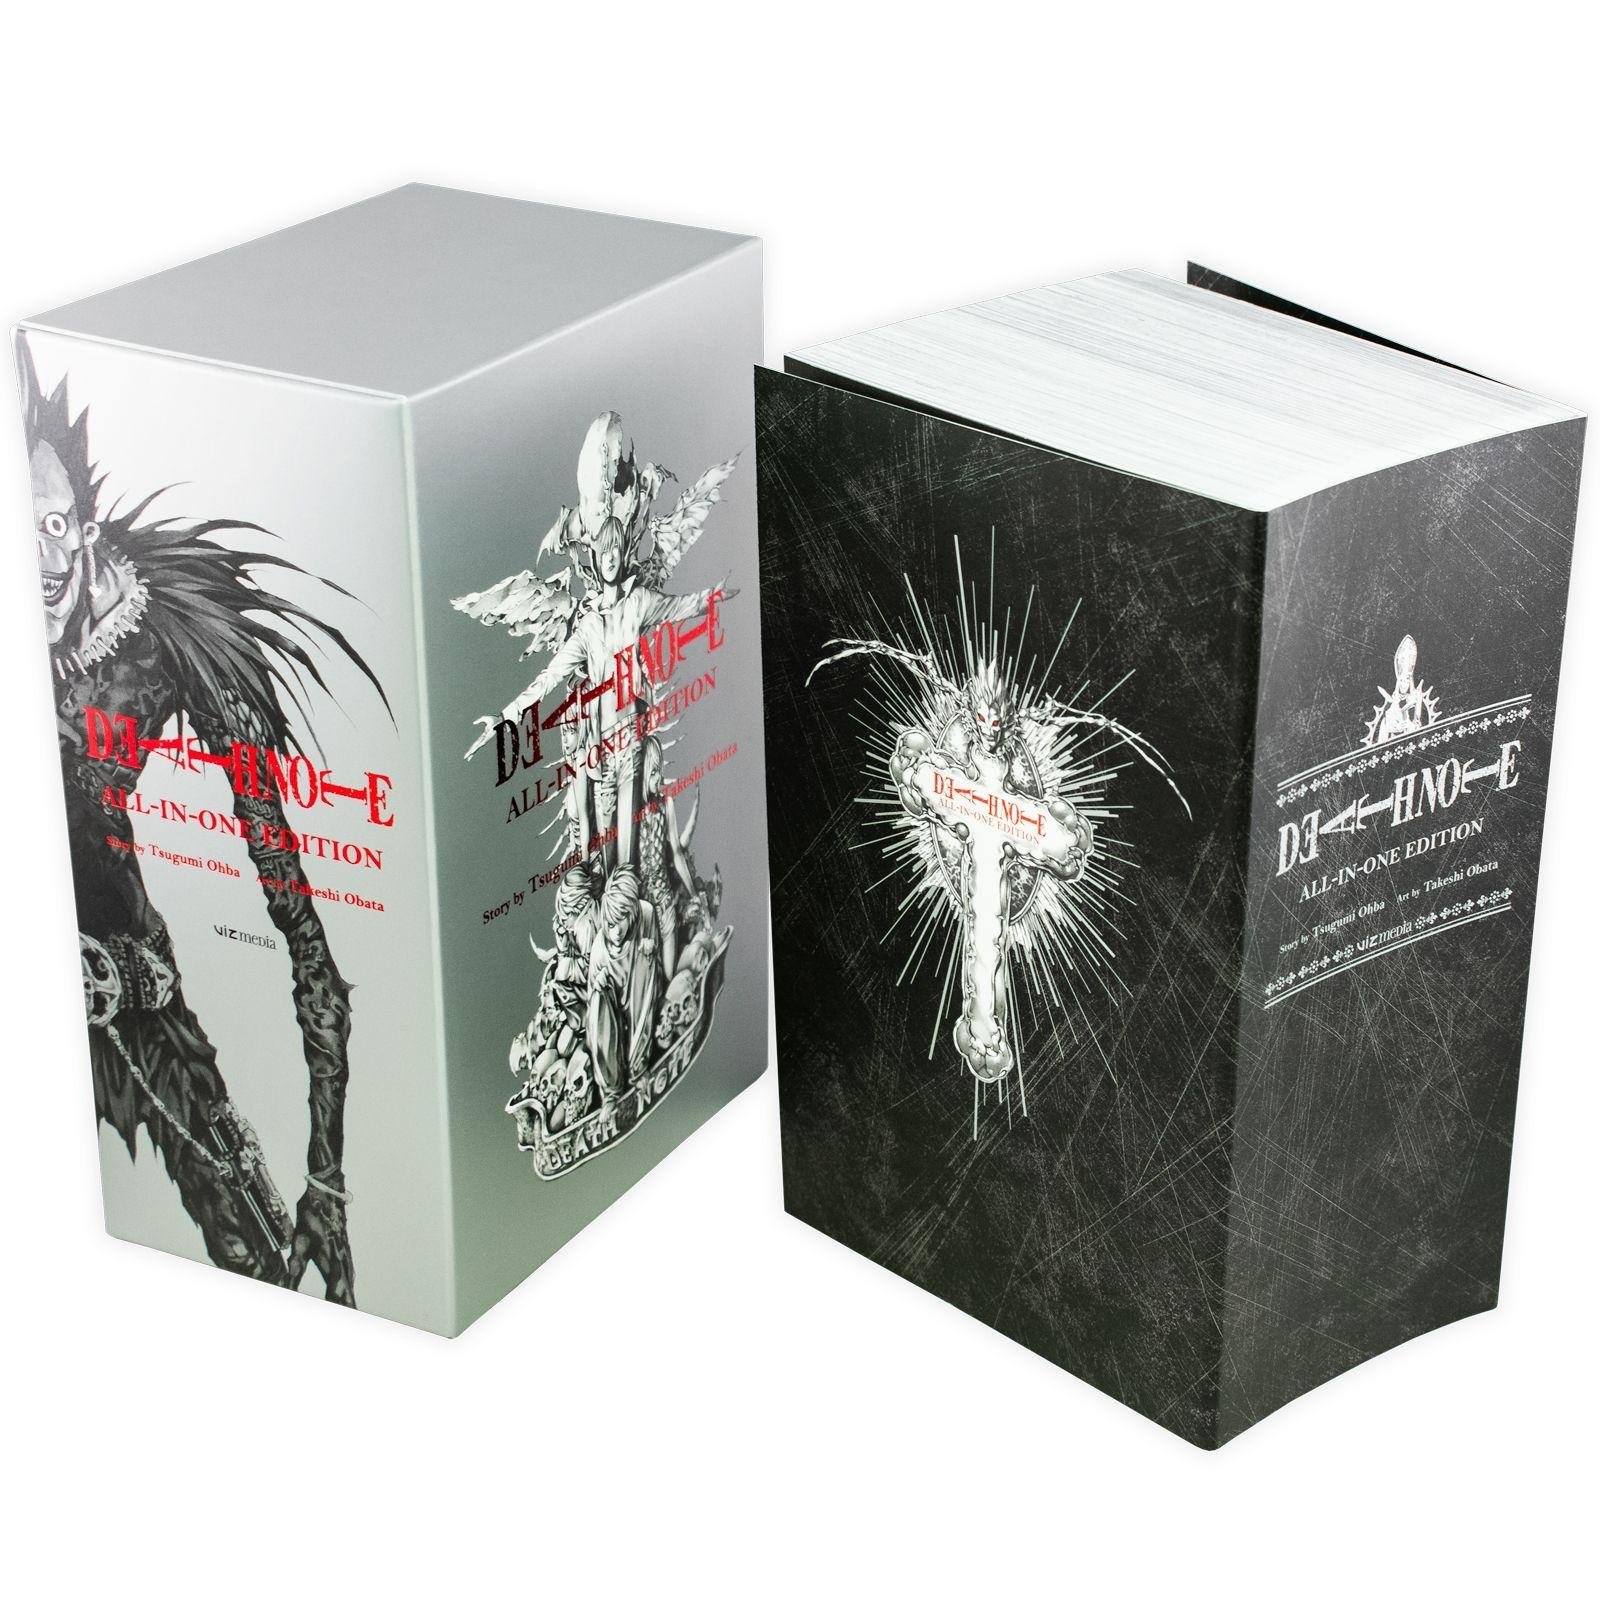 Death Note: All-In-One Edition by Tsugumi Ohba & Takeshi Obata - Manga - Paperback